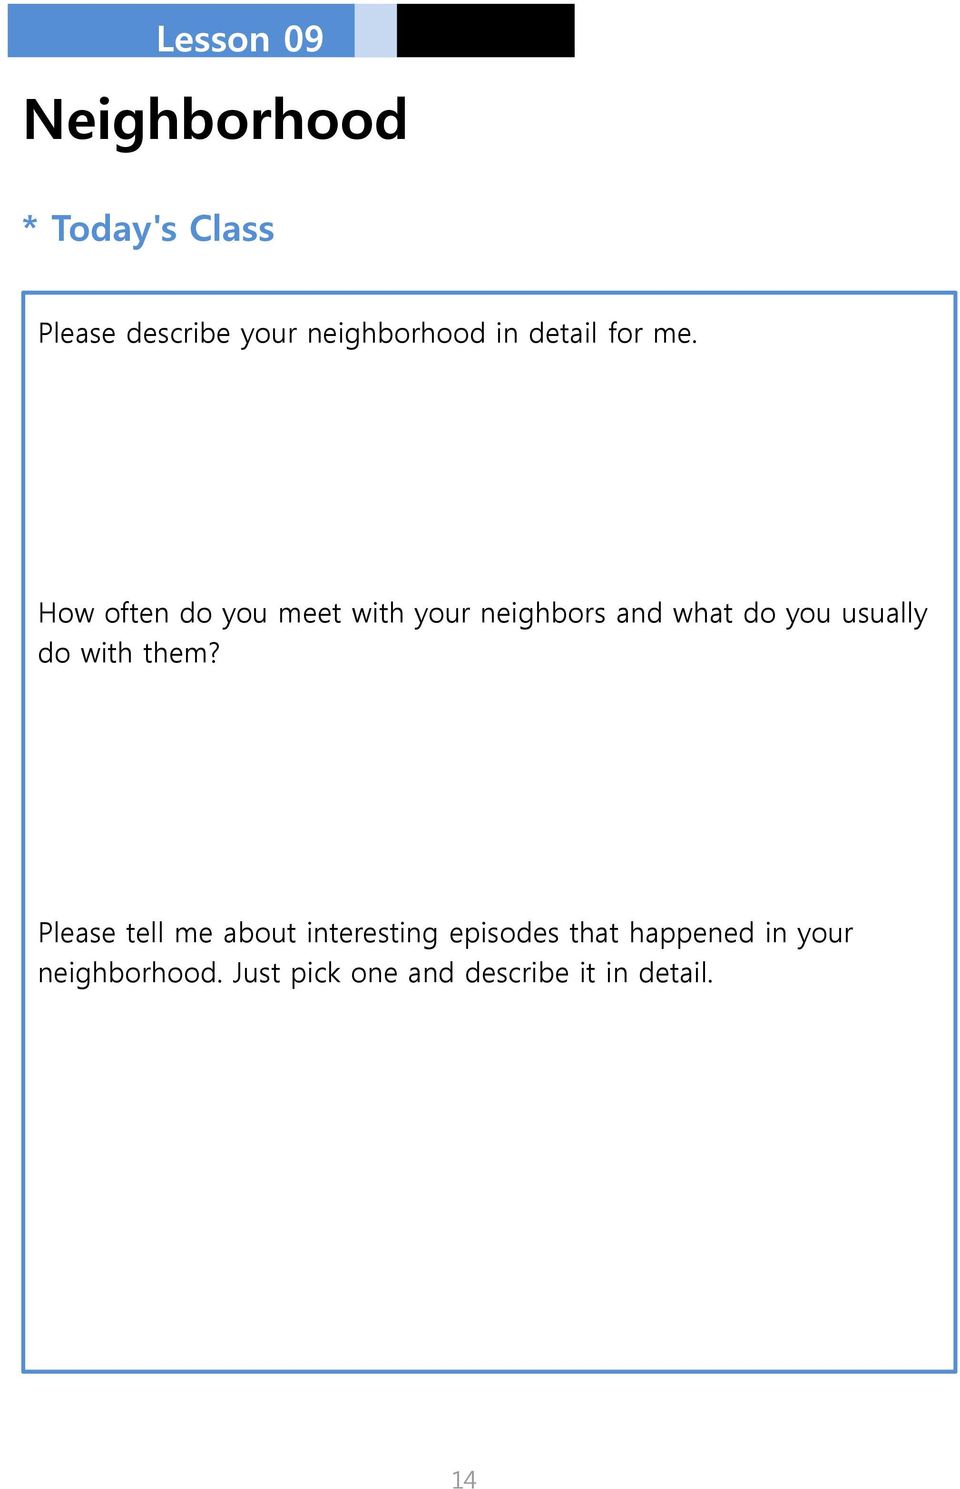 How often do you meet with your neighbors and what do you usually do